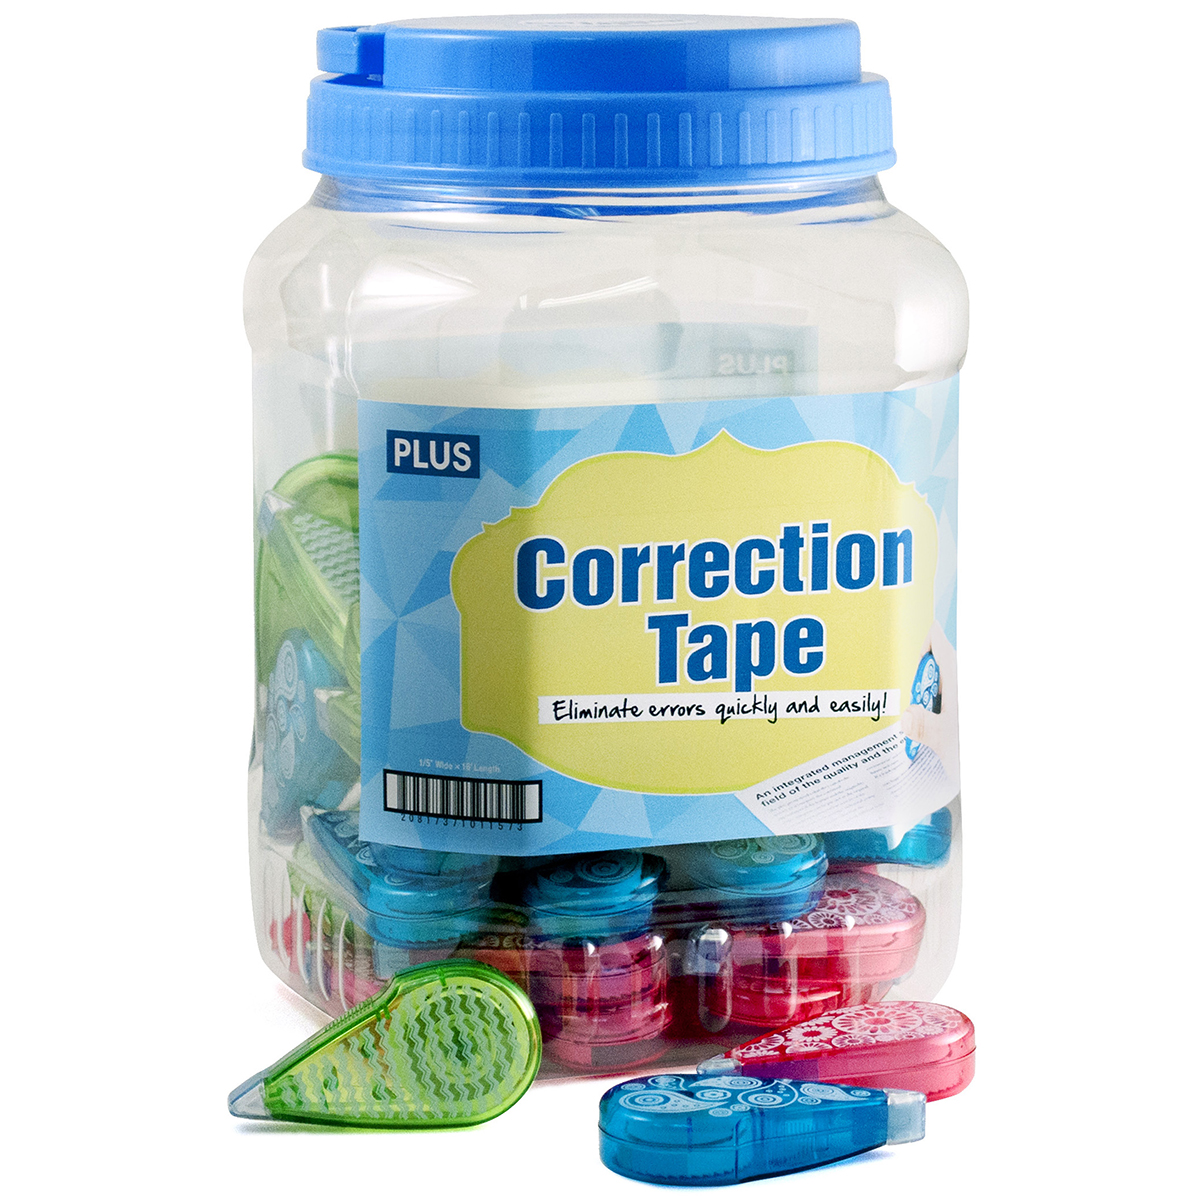 44809 Correction Tape Grab Jar - Assorted Colors, 50 Pieces